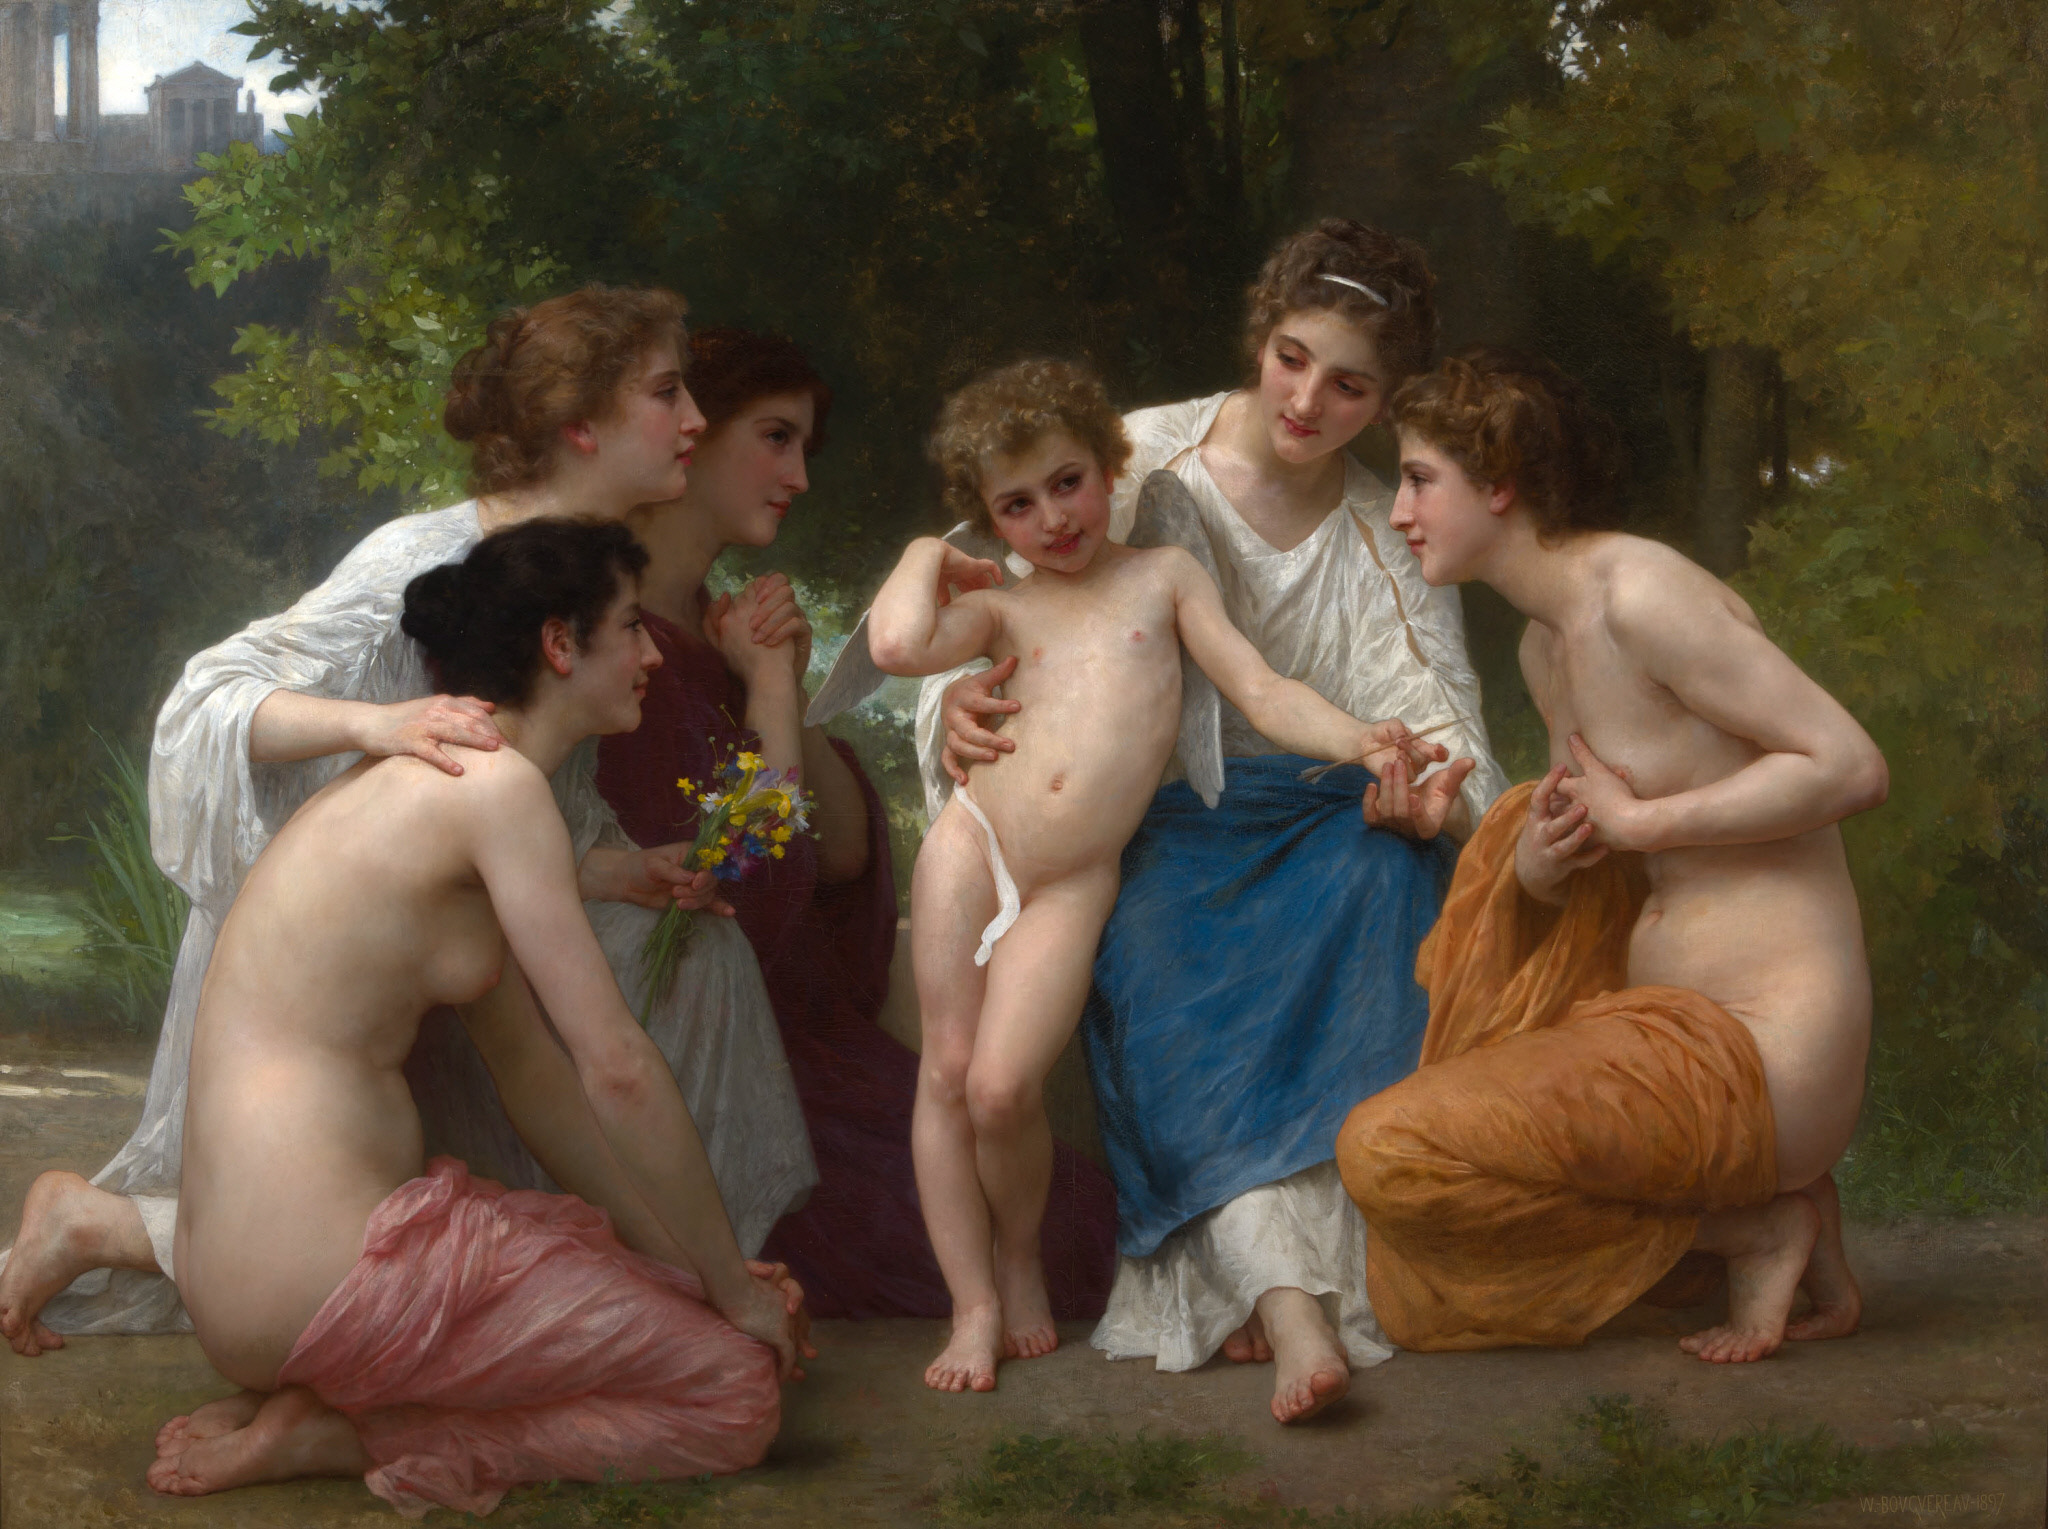 Image:  William-Adolphe Bouguereau (French, 1825 - 1905)  Admiration, 1897  Oil on canvas  58 x 78 in. (147.3 x 198.1 cm)  Bequest of Mort D. Goldberg, 59.46.10